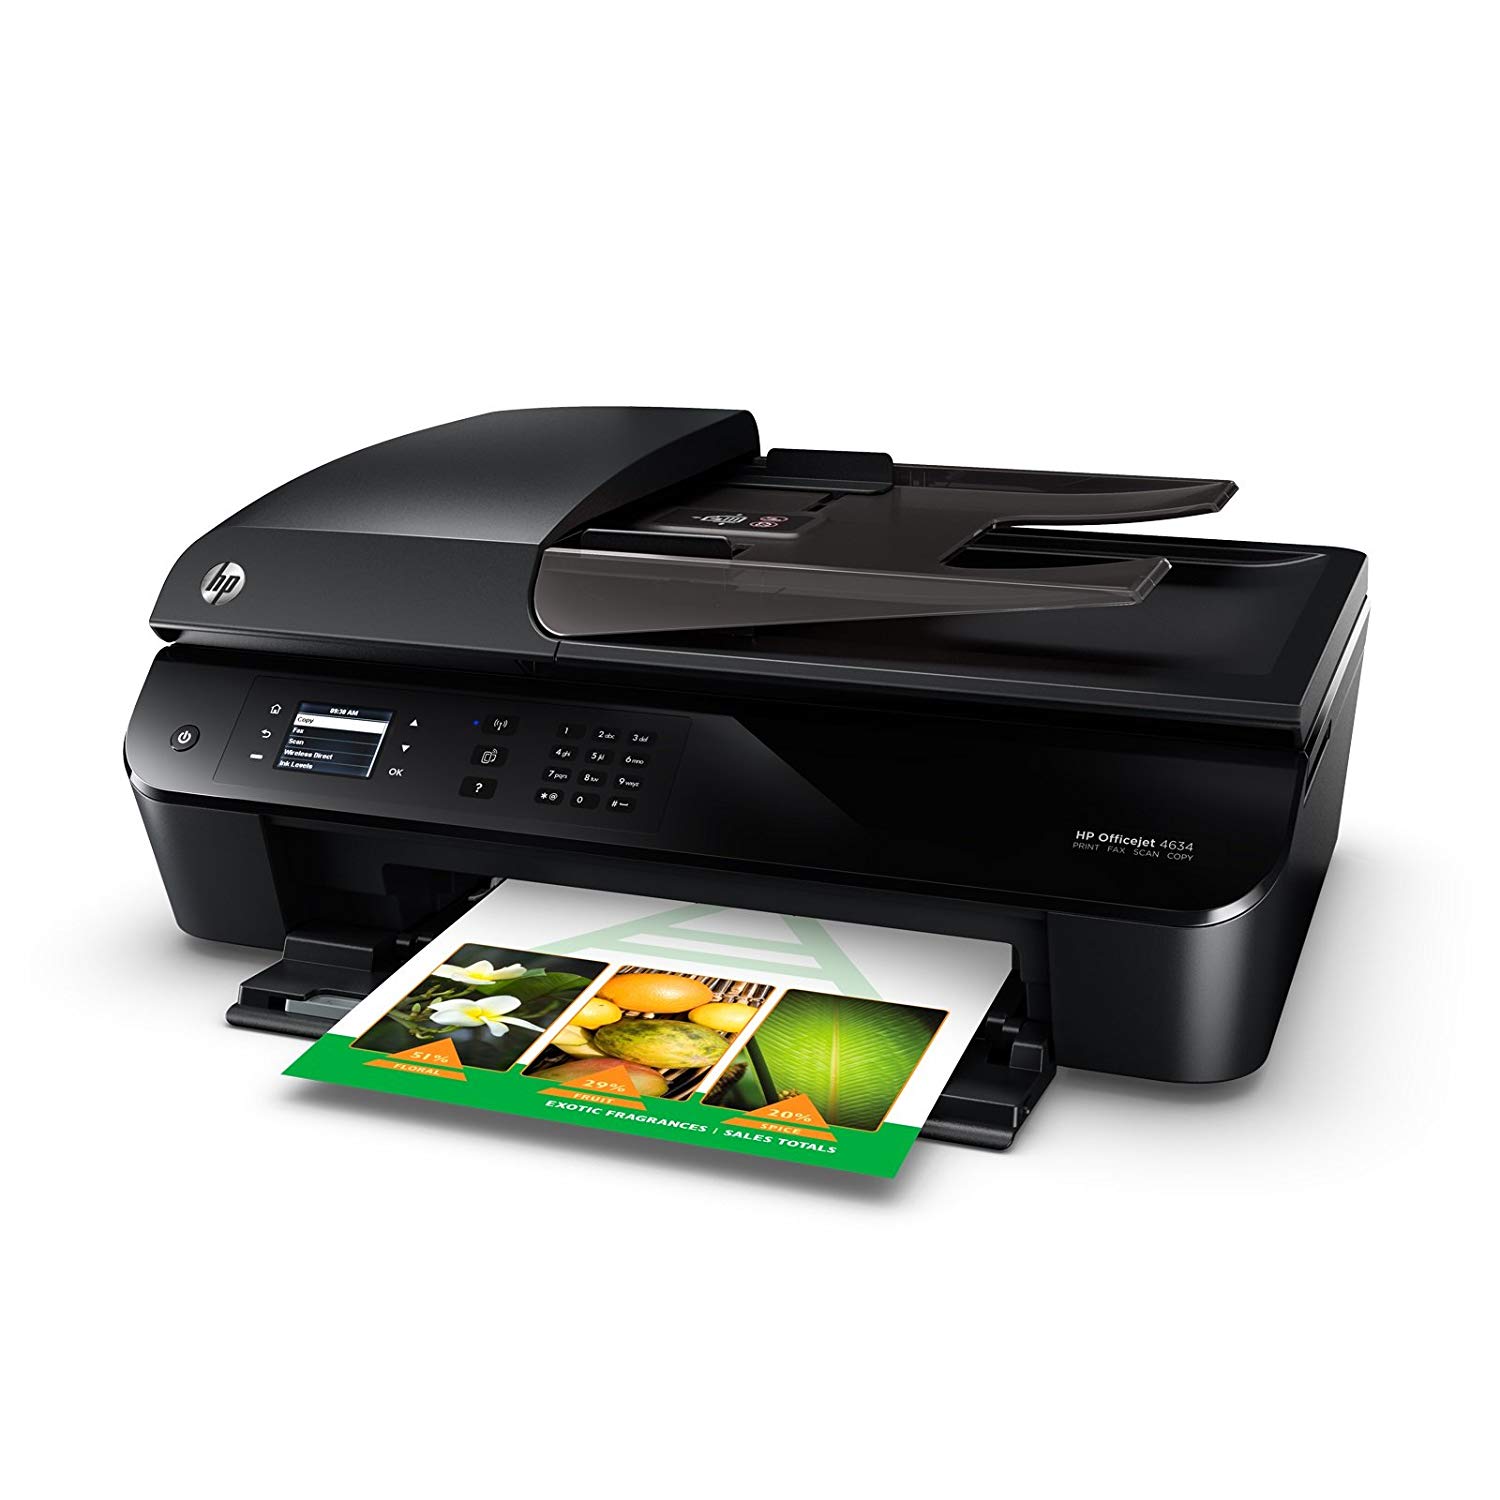 Hp Officejet 3830 Driver Windows 7 How To Setup Hp Officejet 3830